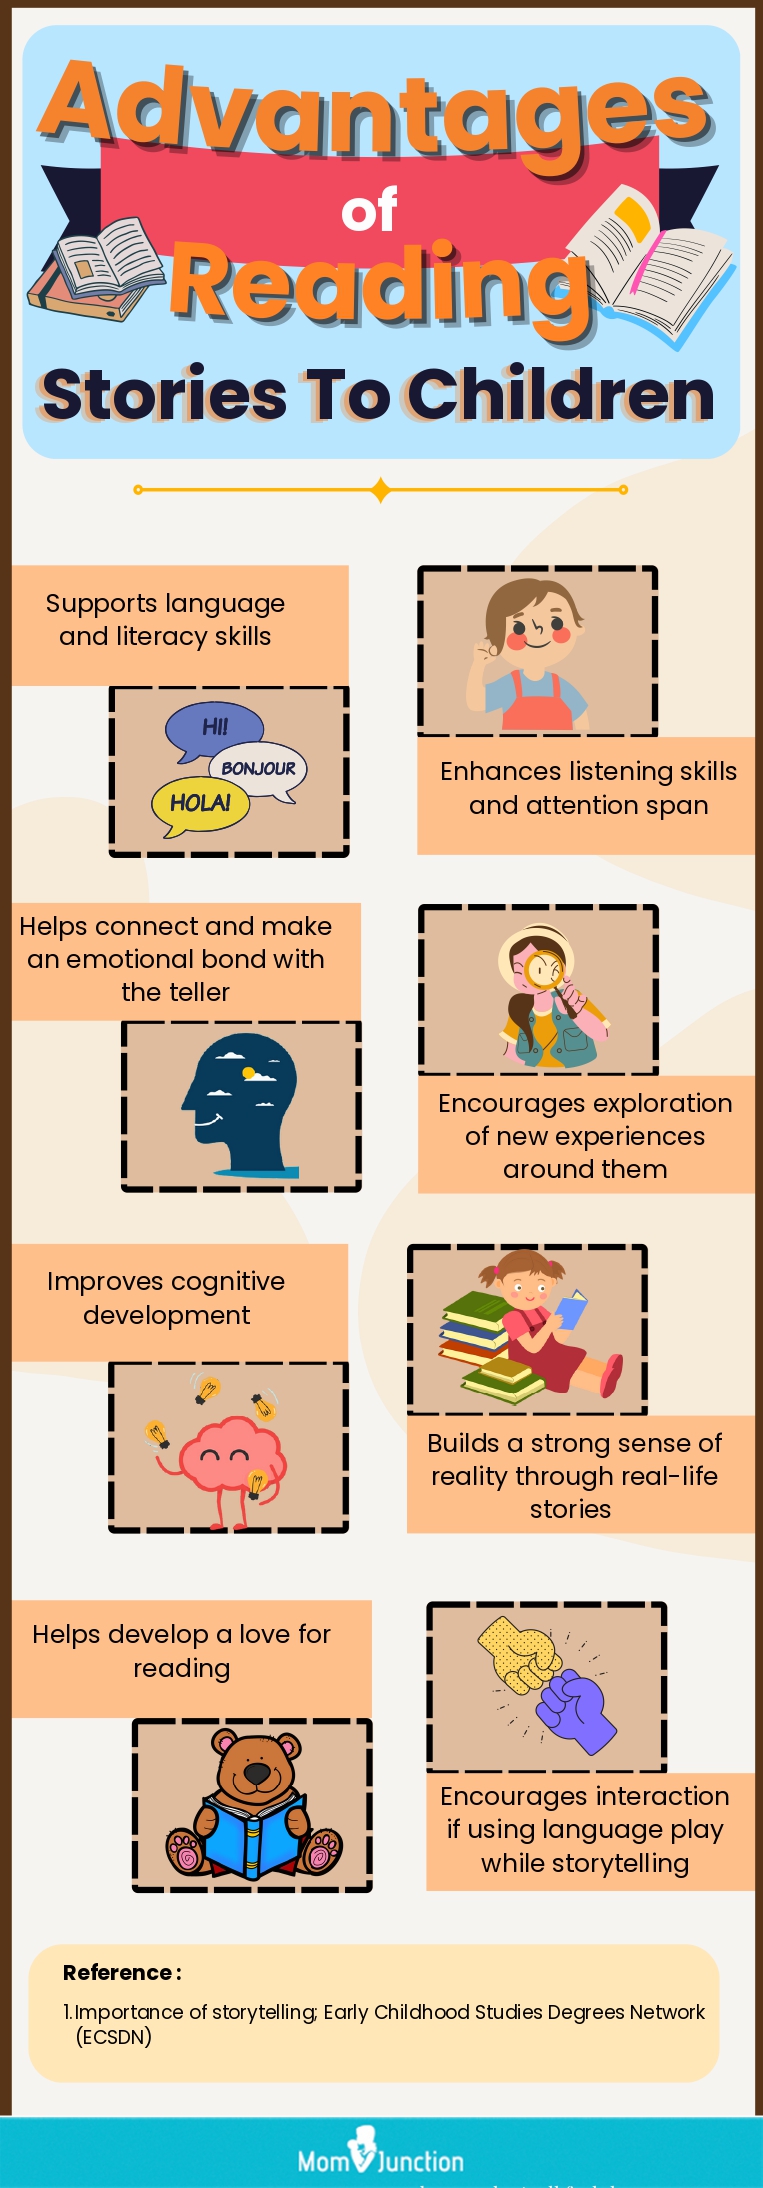 advantages of reading stories to children (infographic)